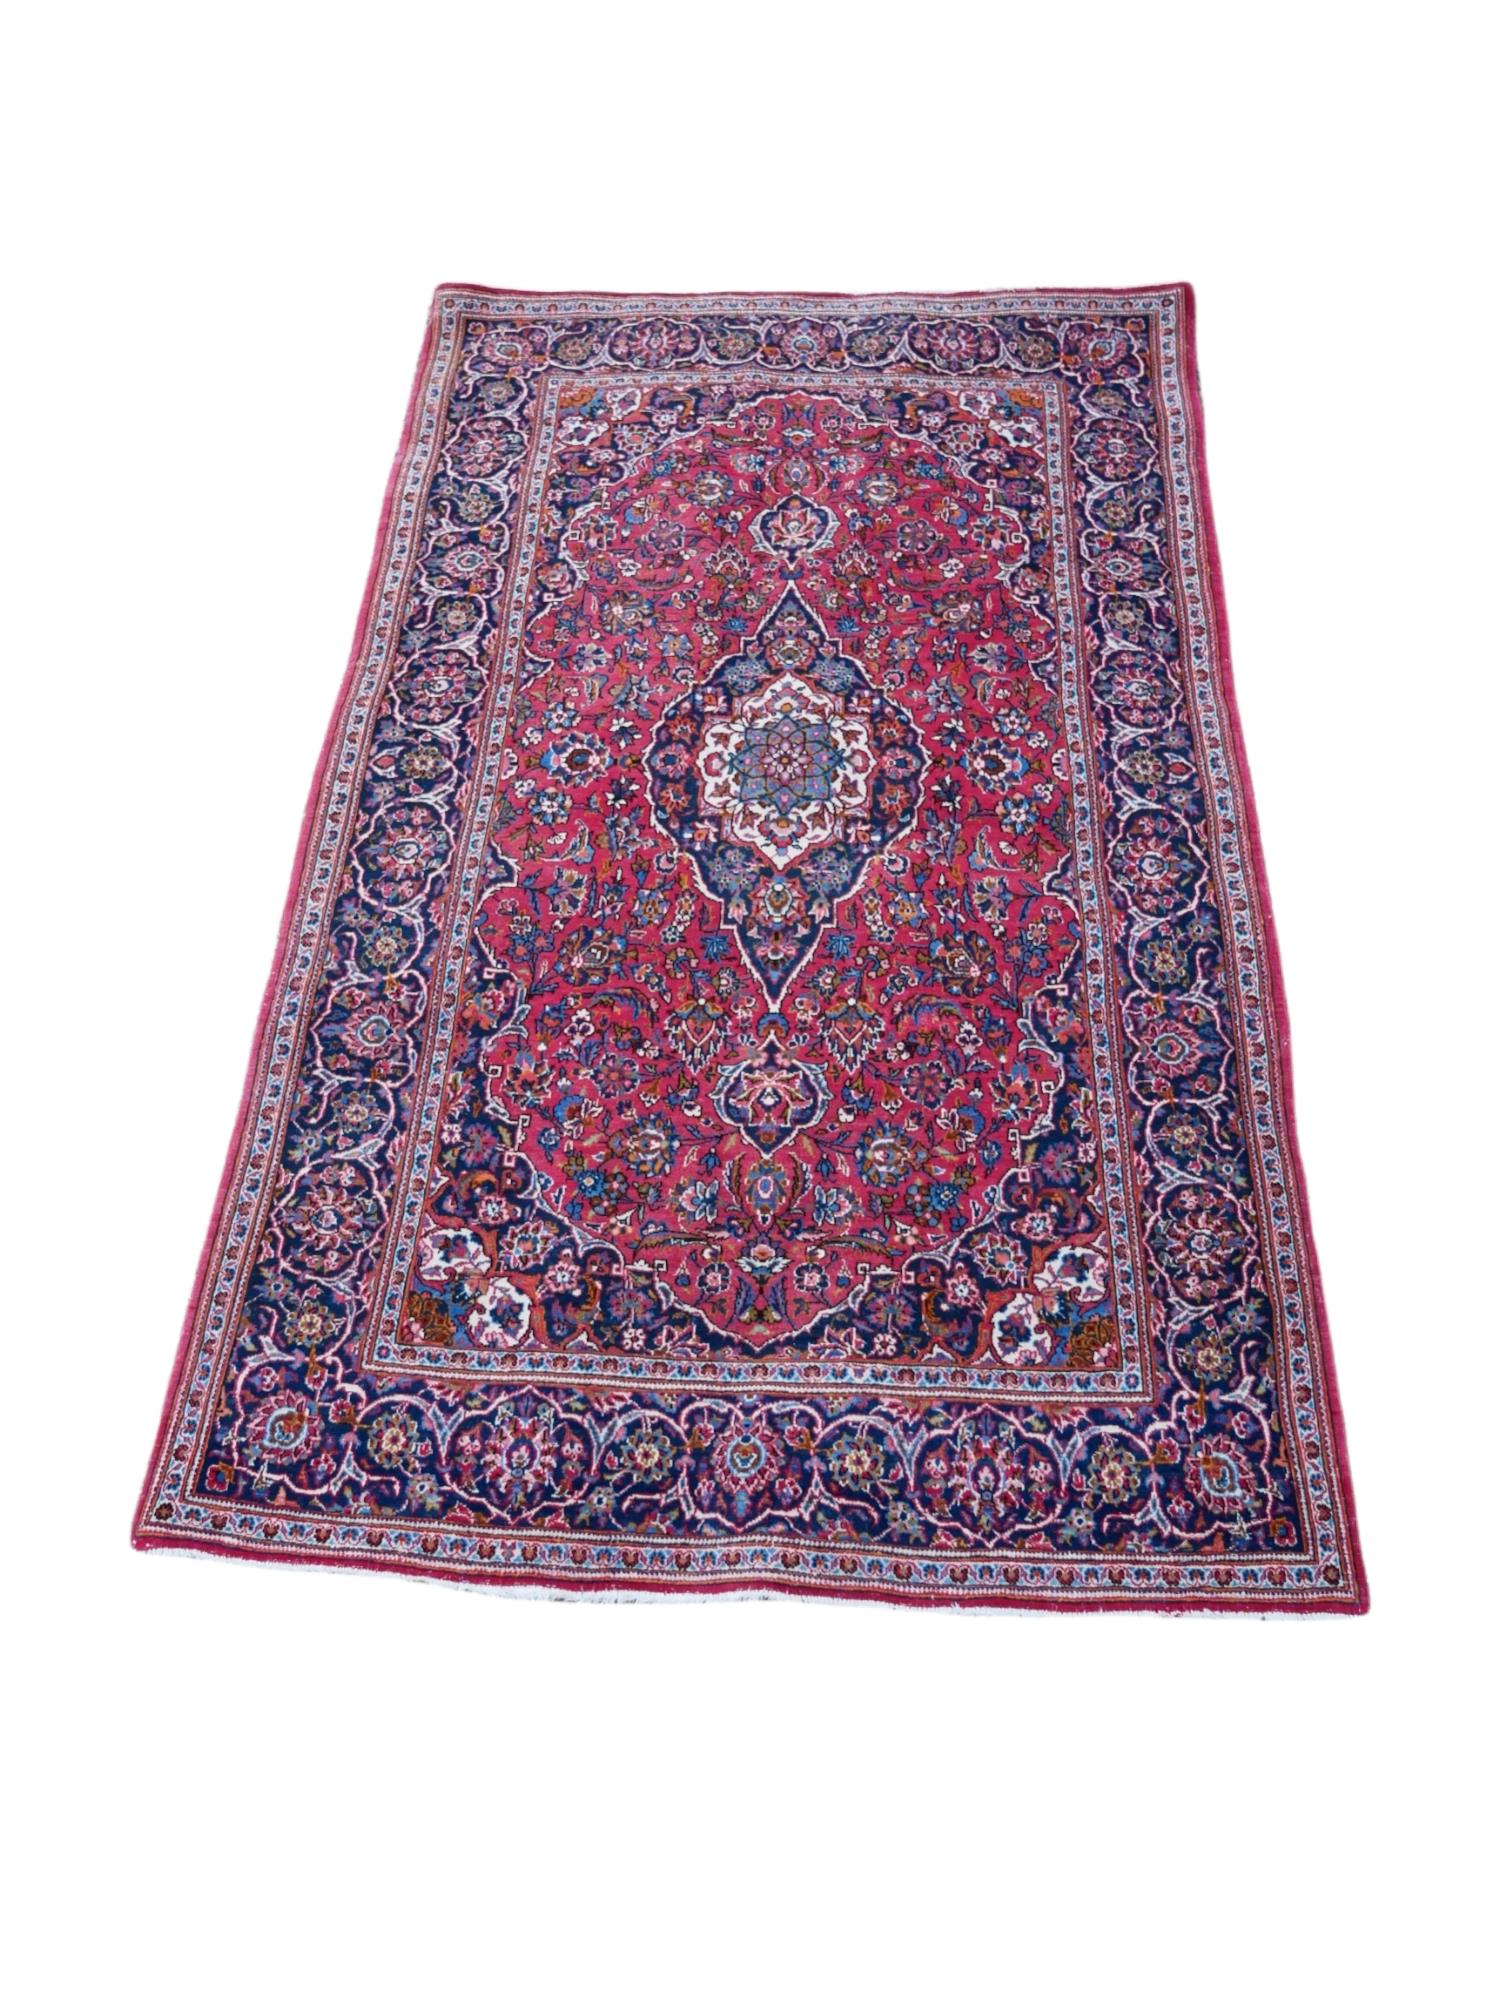 A PERSIAN RUG OF TRADITIONAL DESIGN The central floral field contained within running borders. (